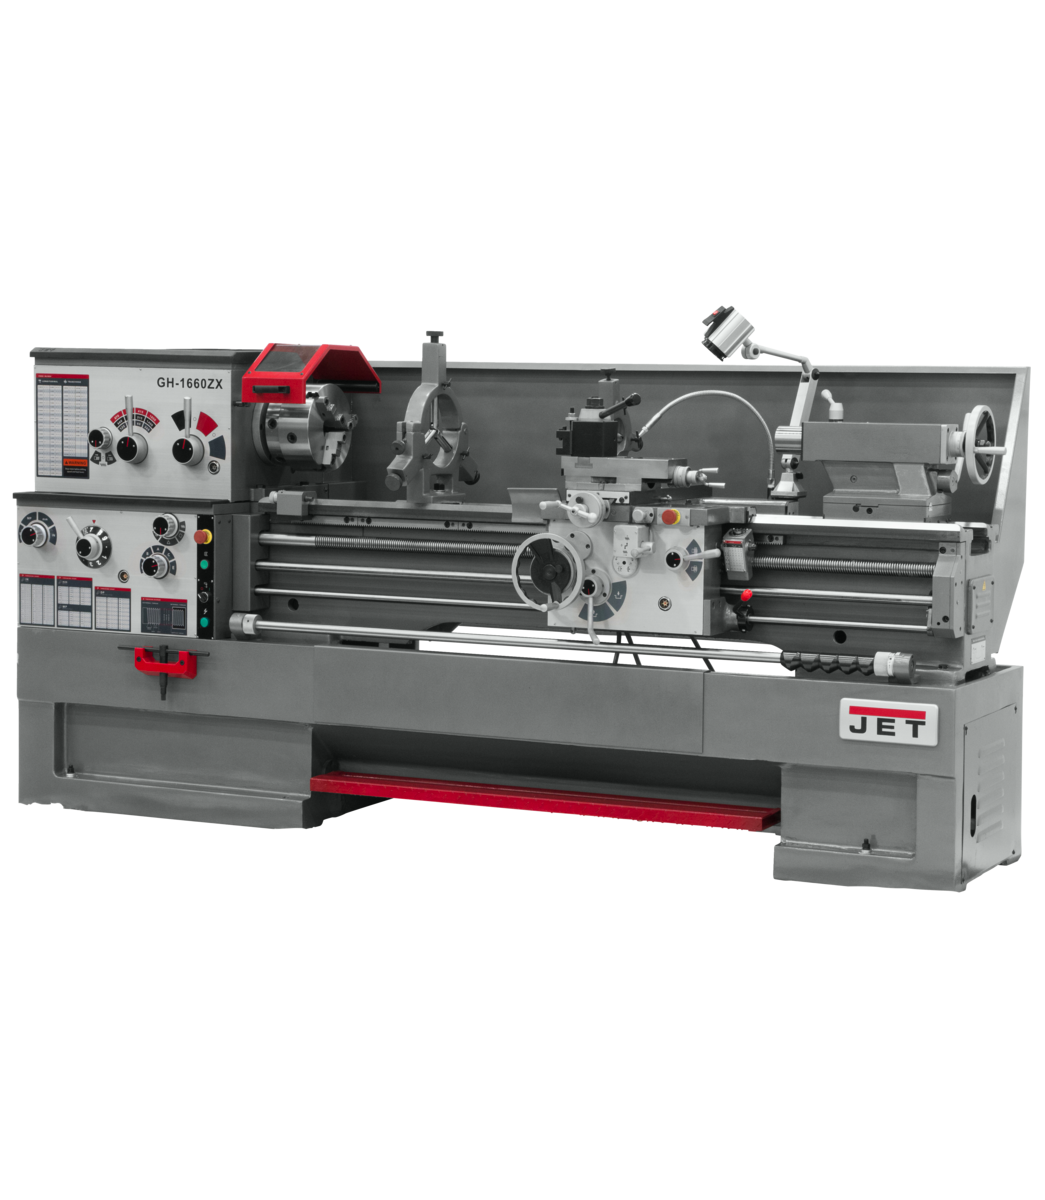 321591, GH-1860ZX , 18" Swing, 60" Between Centers, GH-1860ZX With ACU-RITE 303 DRO & Taper Attachmentt installed, Jet, Metalworking, Turning, Lathes